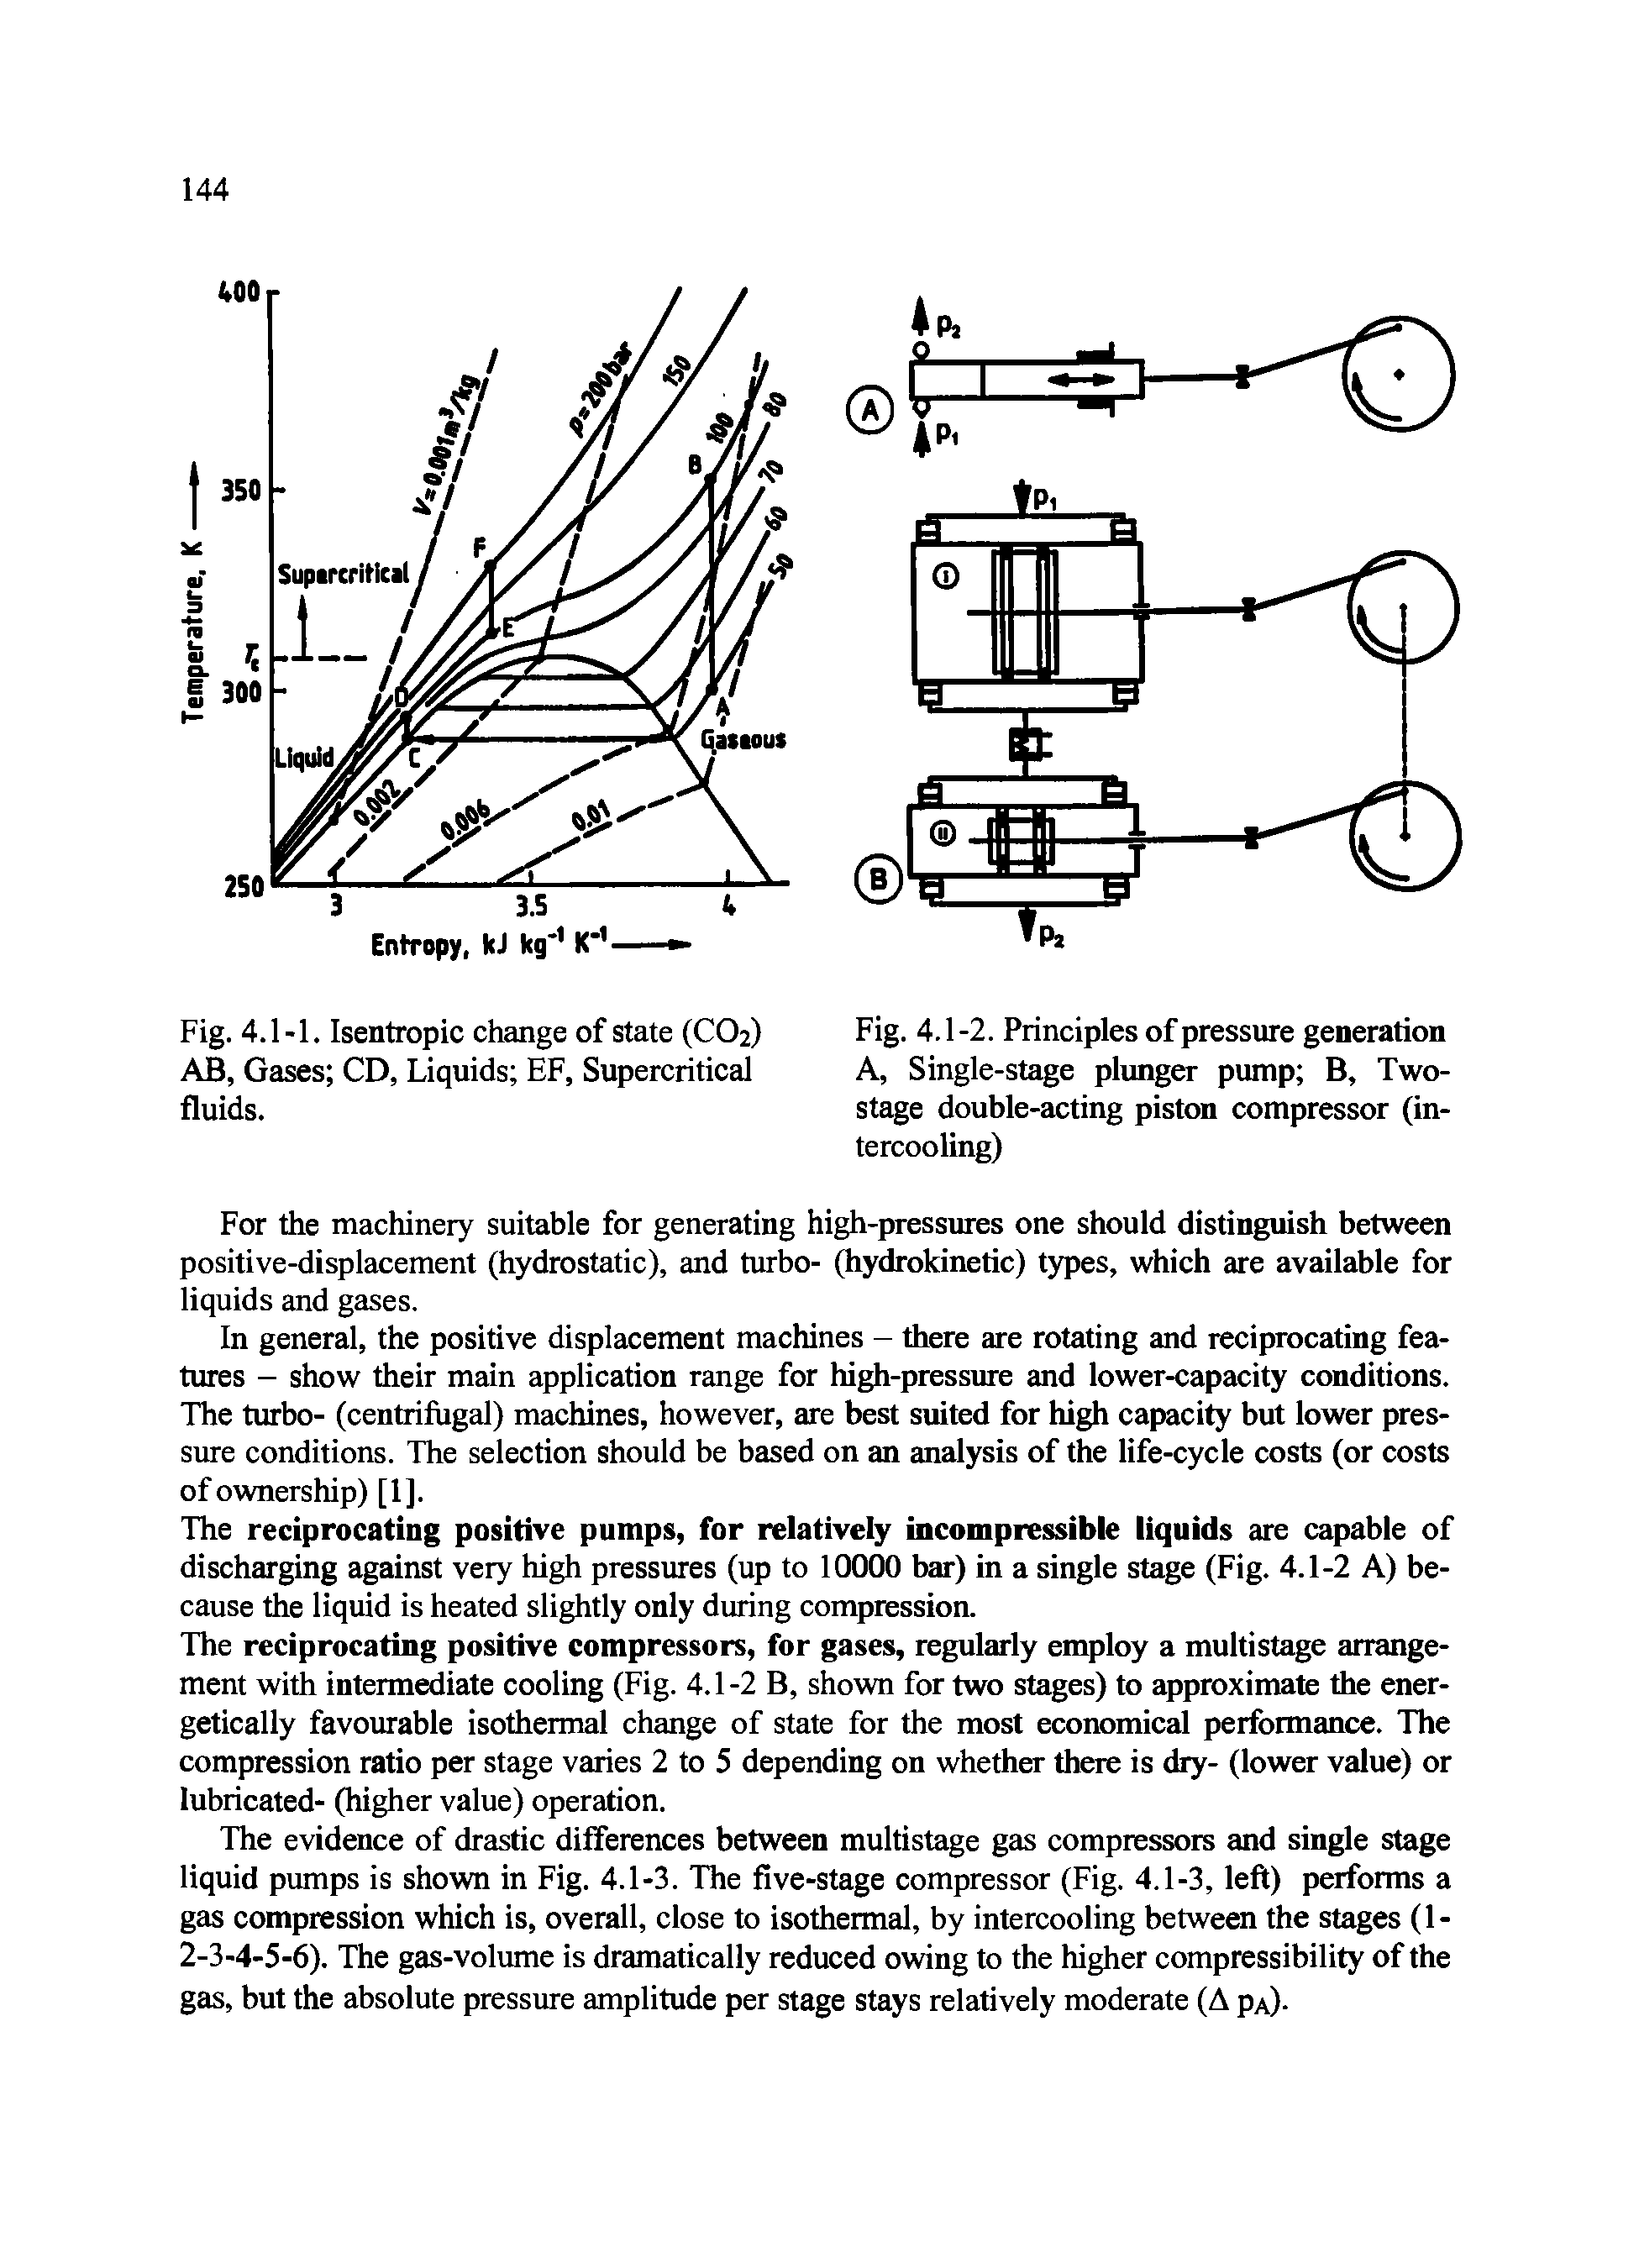 Fig. 4.1-2. Principles of pressure generation A, Single-stage plunger pump B, Two-stage double-acting piston compressor (intercooling)...